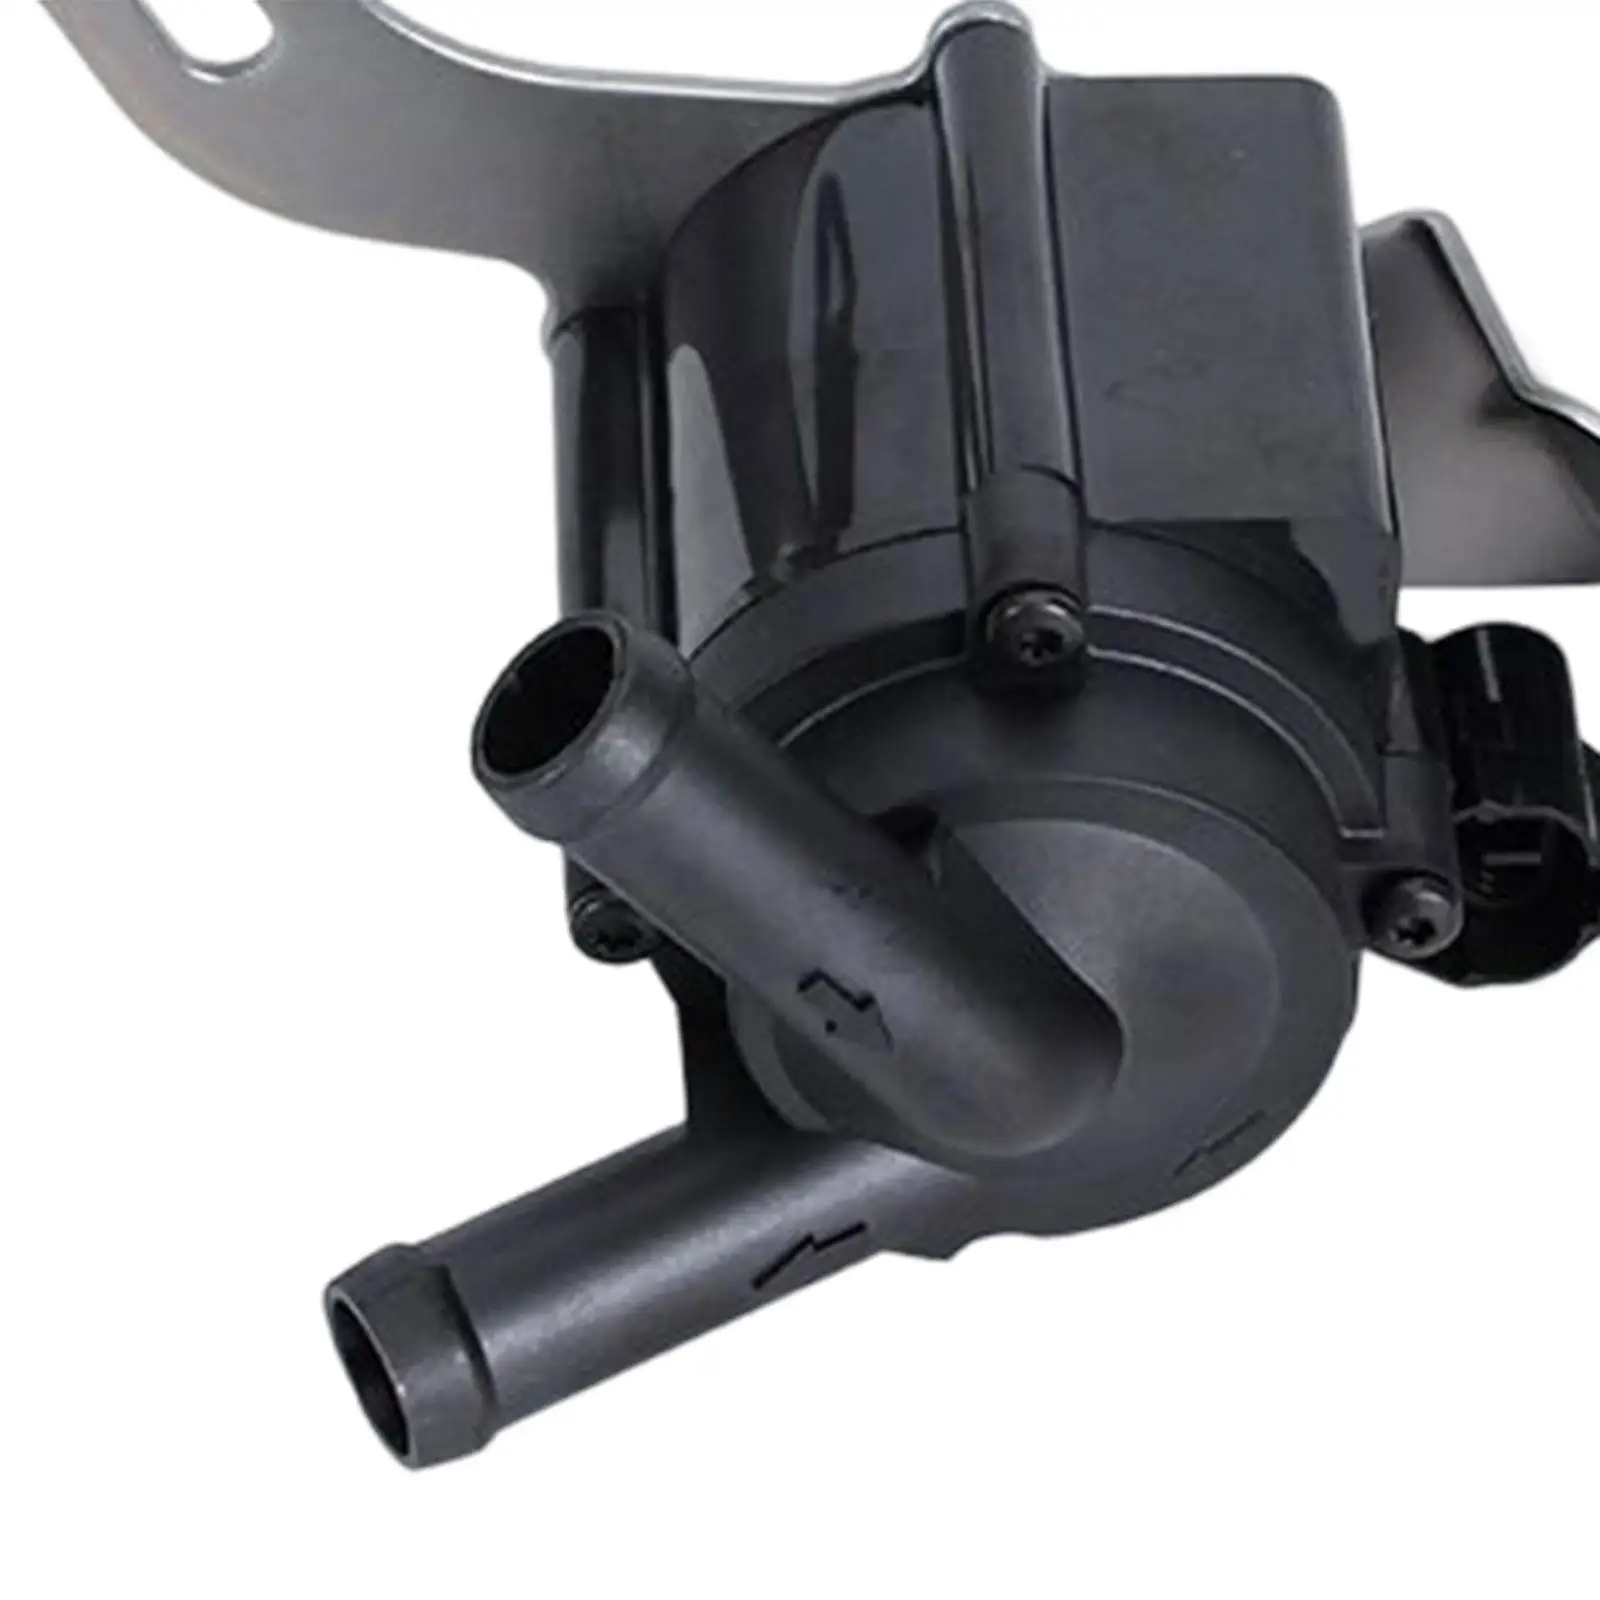 Auto Electronic Water Pump Supplies Direct Replaces for Haval Cars